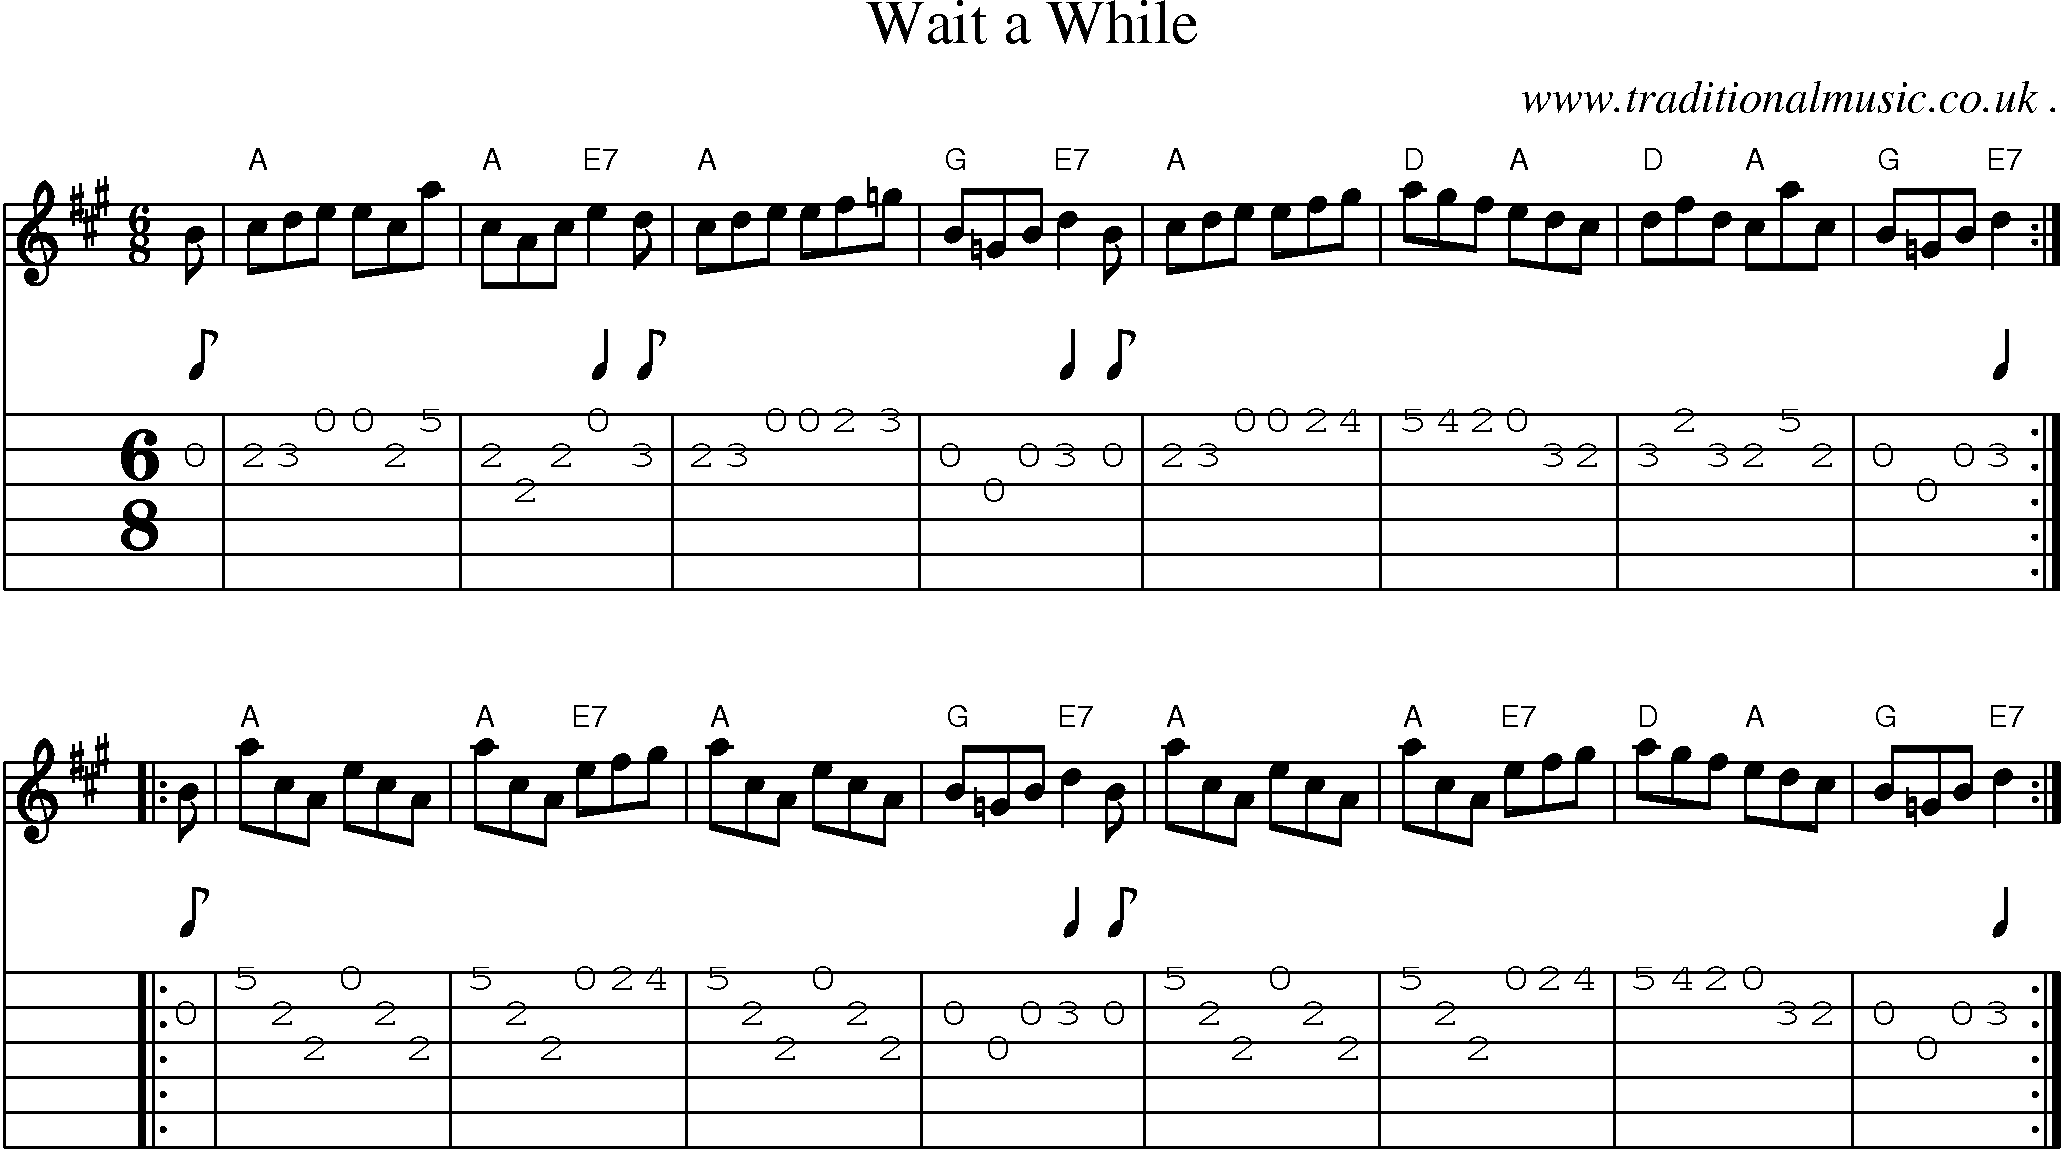 Sheet-music  score, Chords and Guitar Tabs for Wait A While